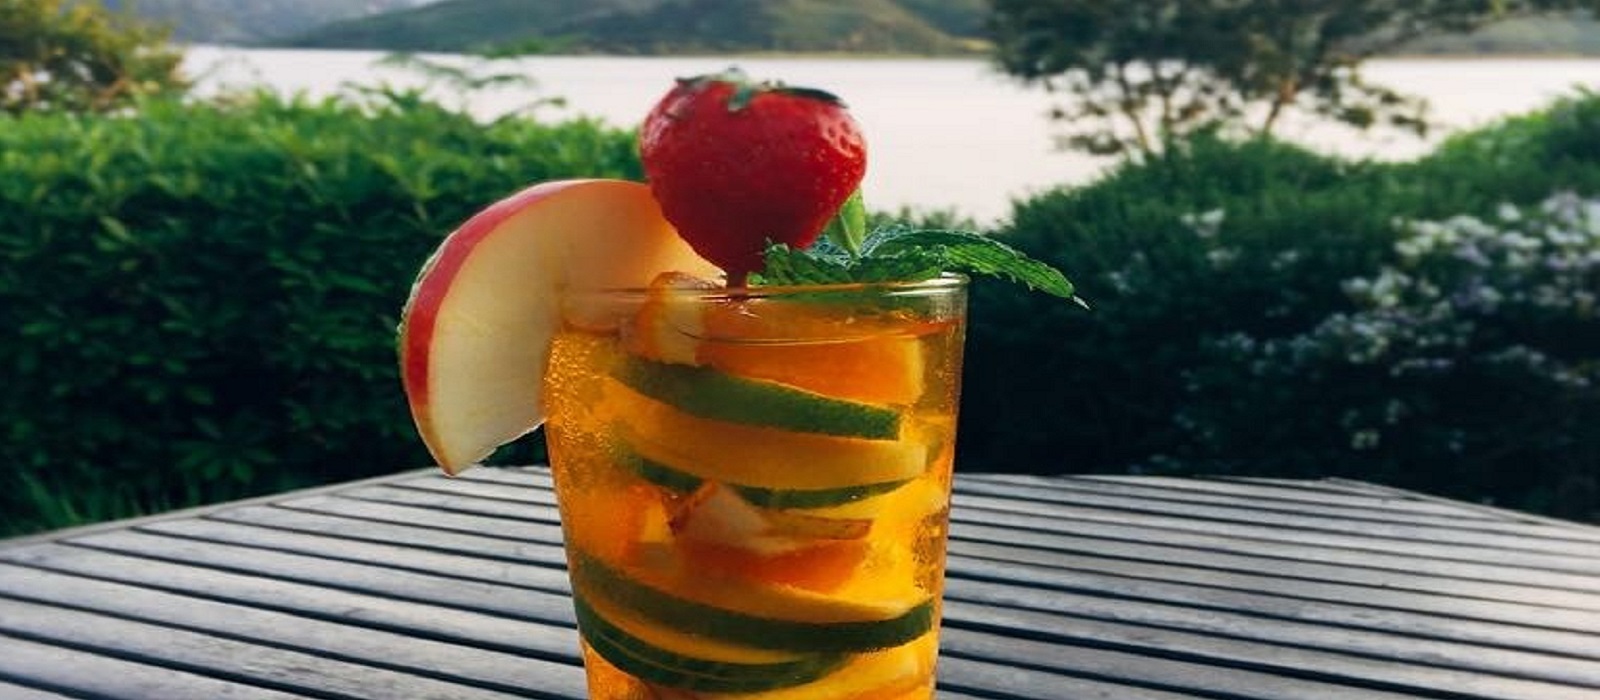 Pimms Recipe from Carrig House